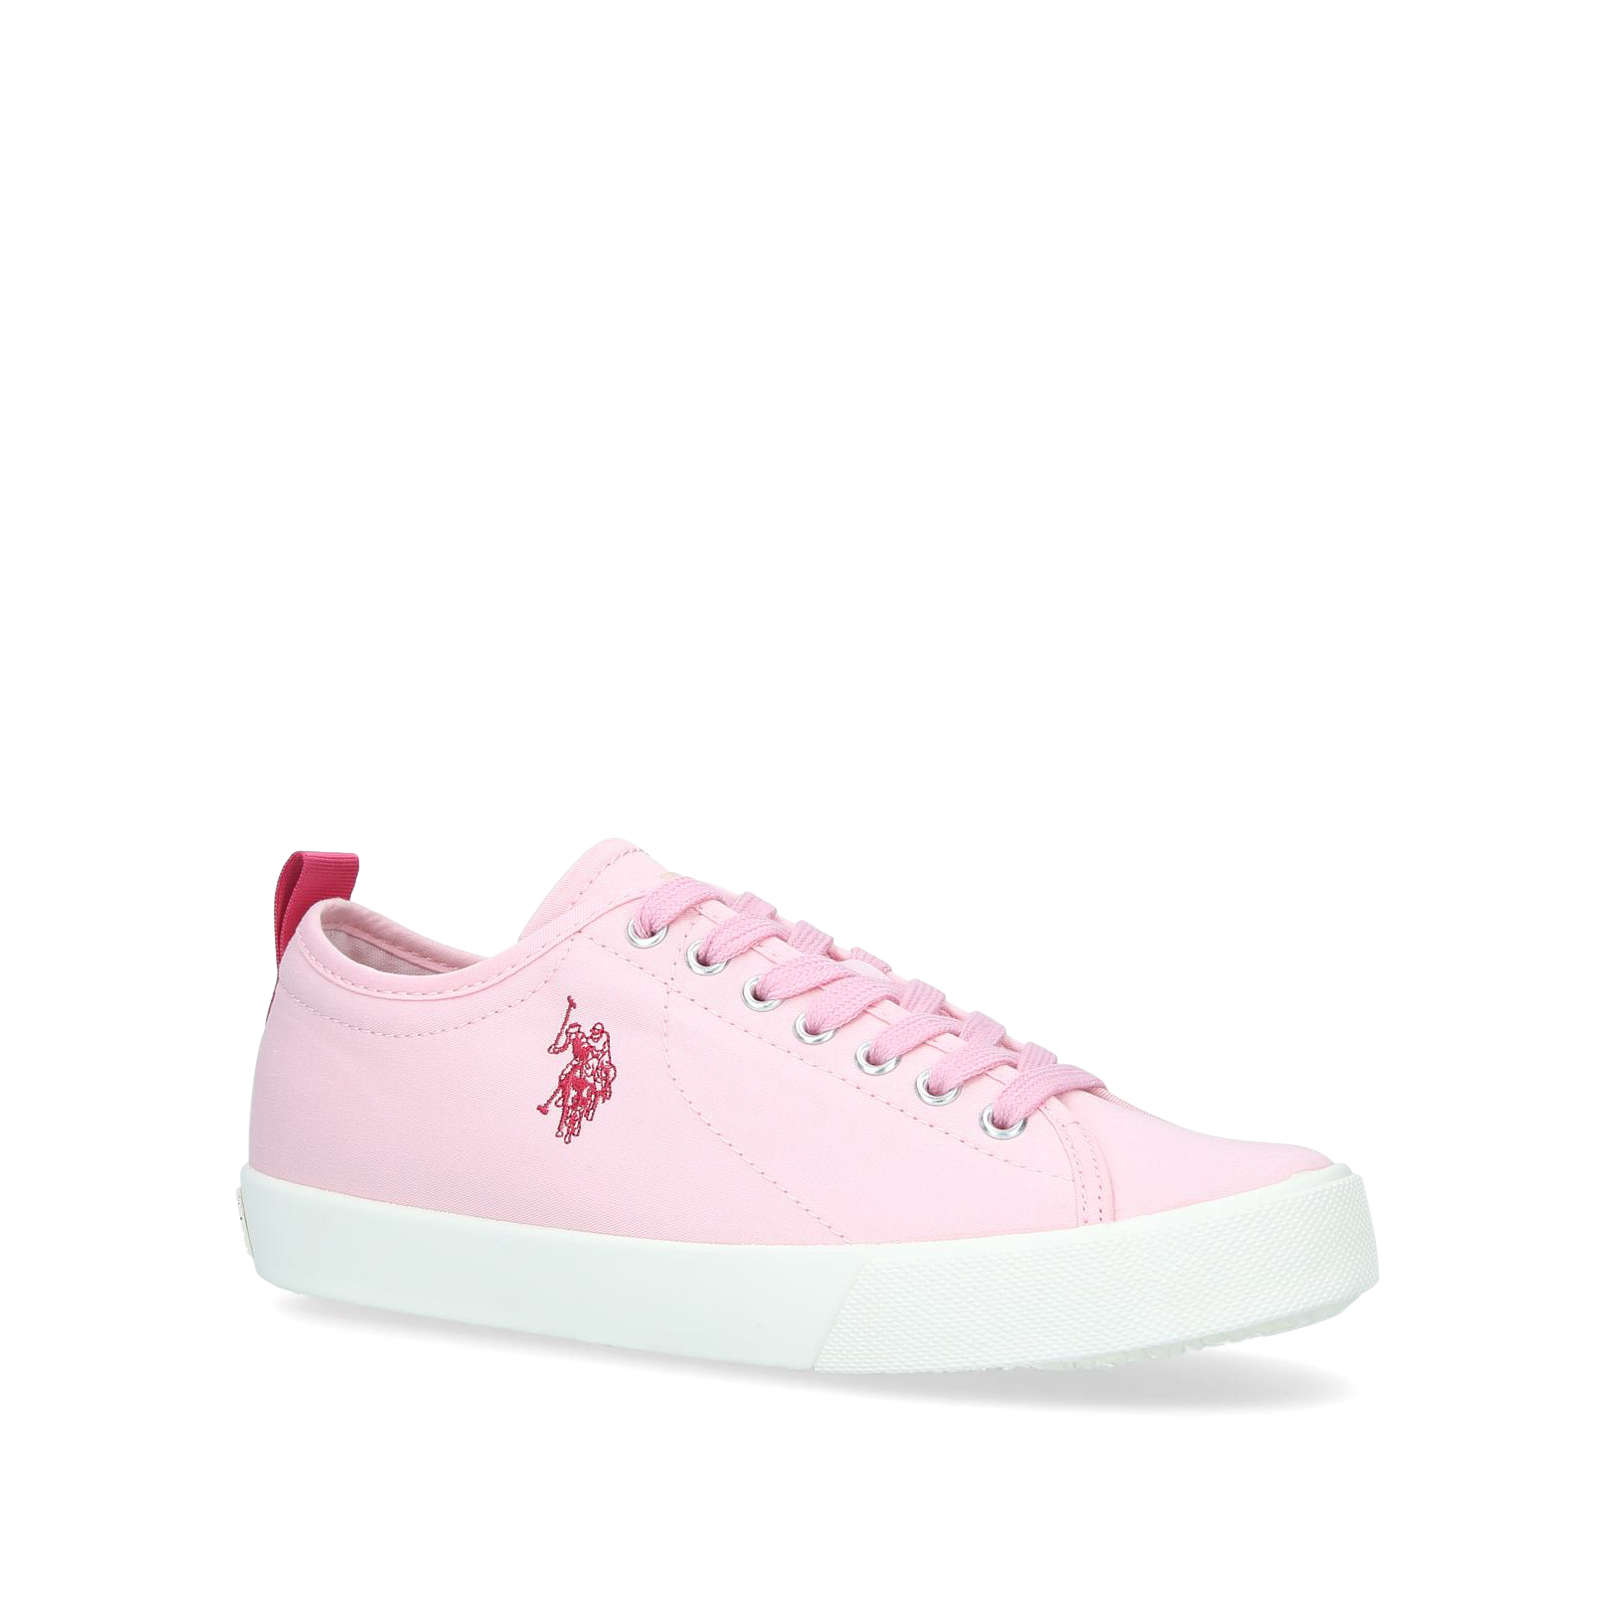 JUNE - US POLO ASSN Sneakers